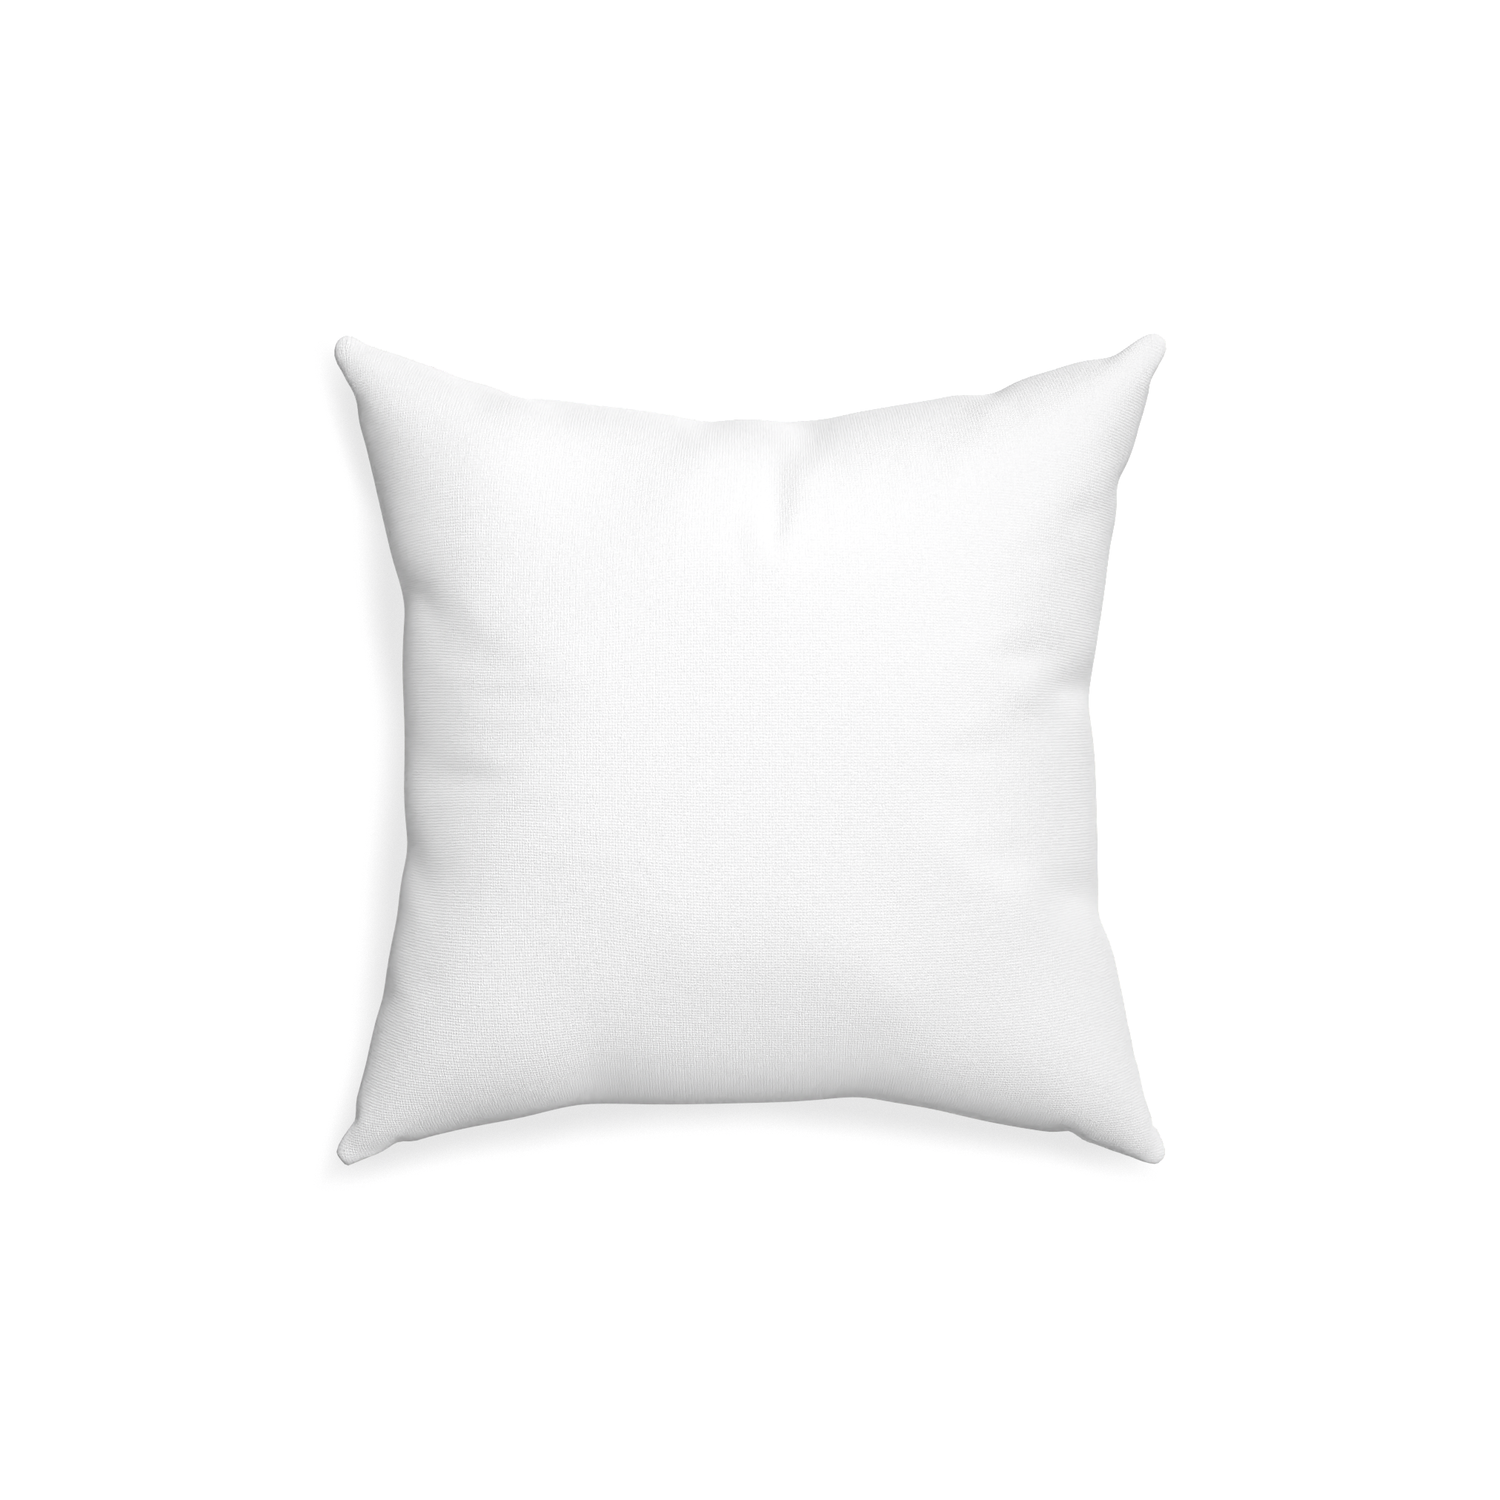 18-square snow custom pillow with none on white background